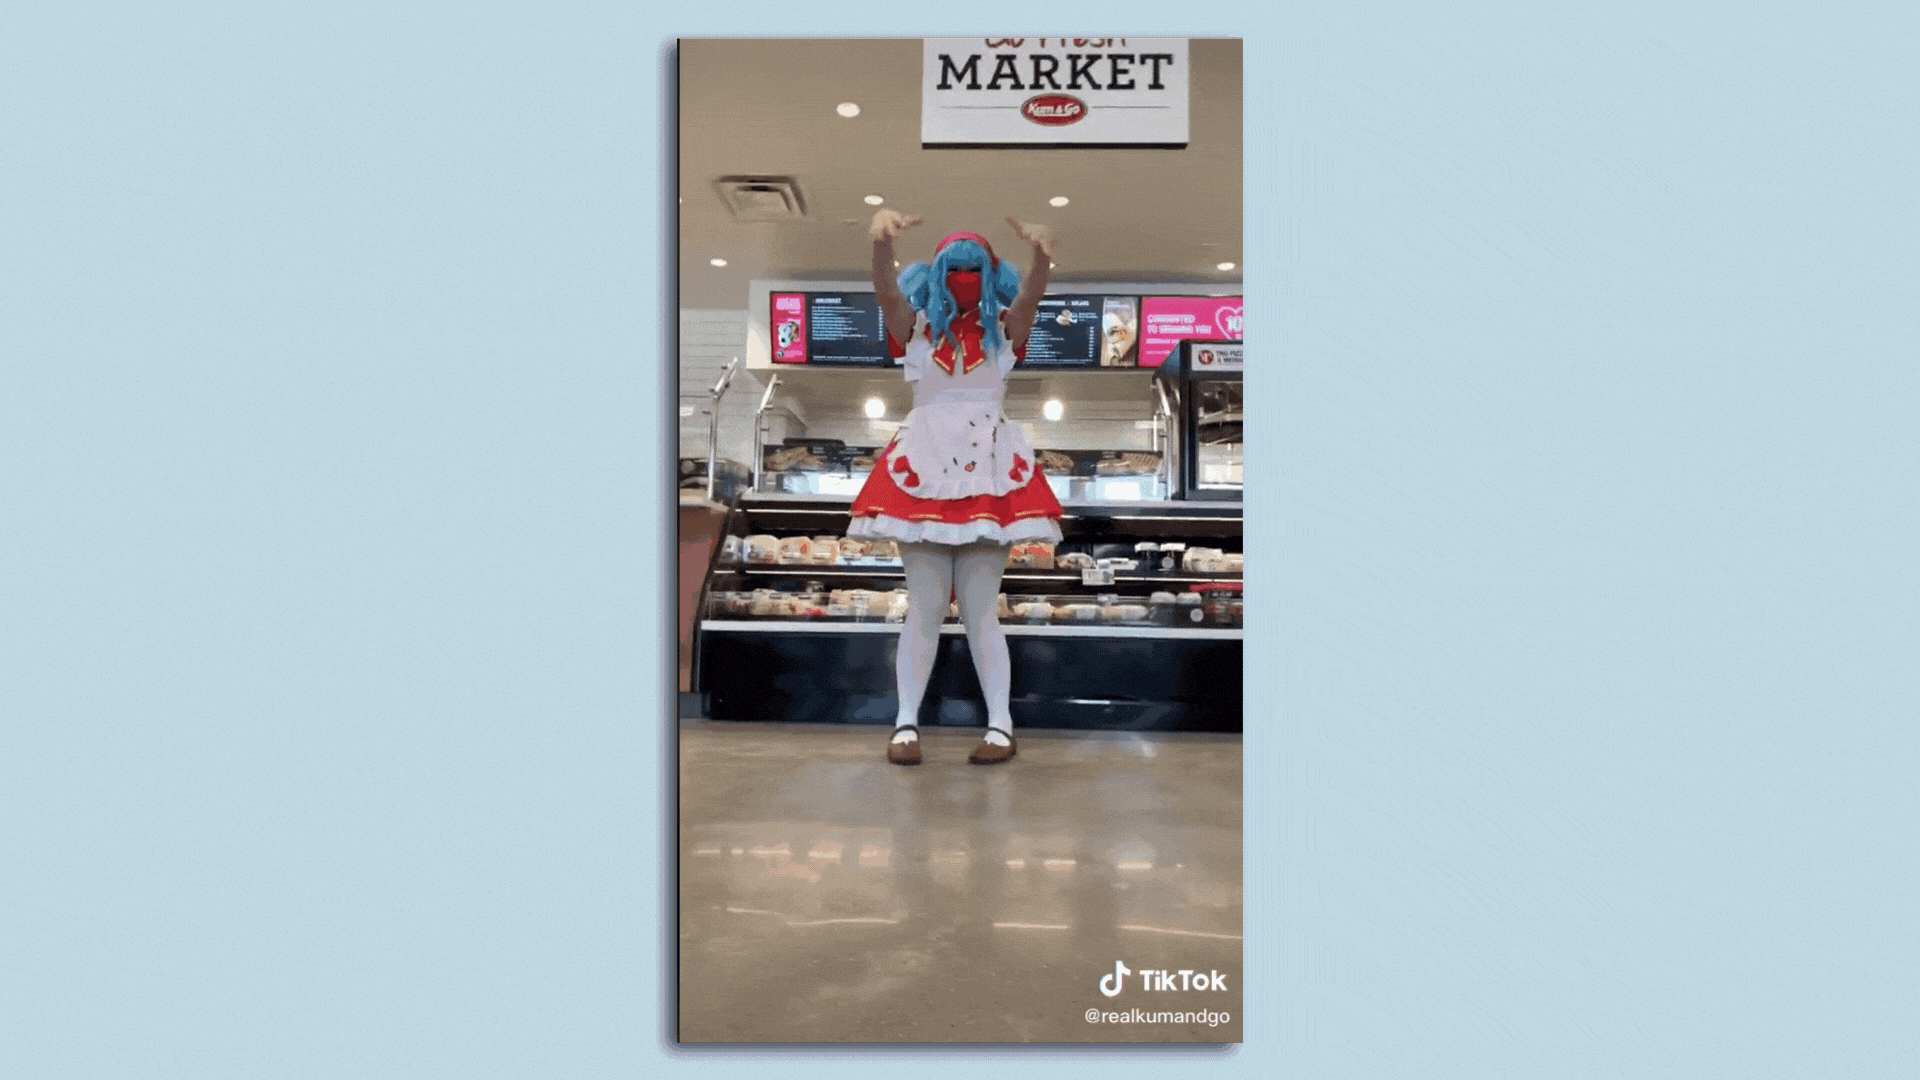 A gif showing a cosplay of Hatsune Miku at Kum & Go.